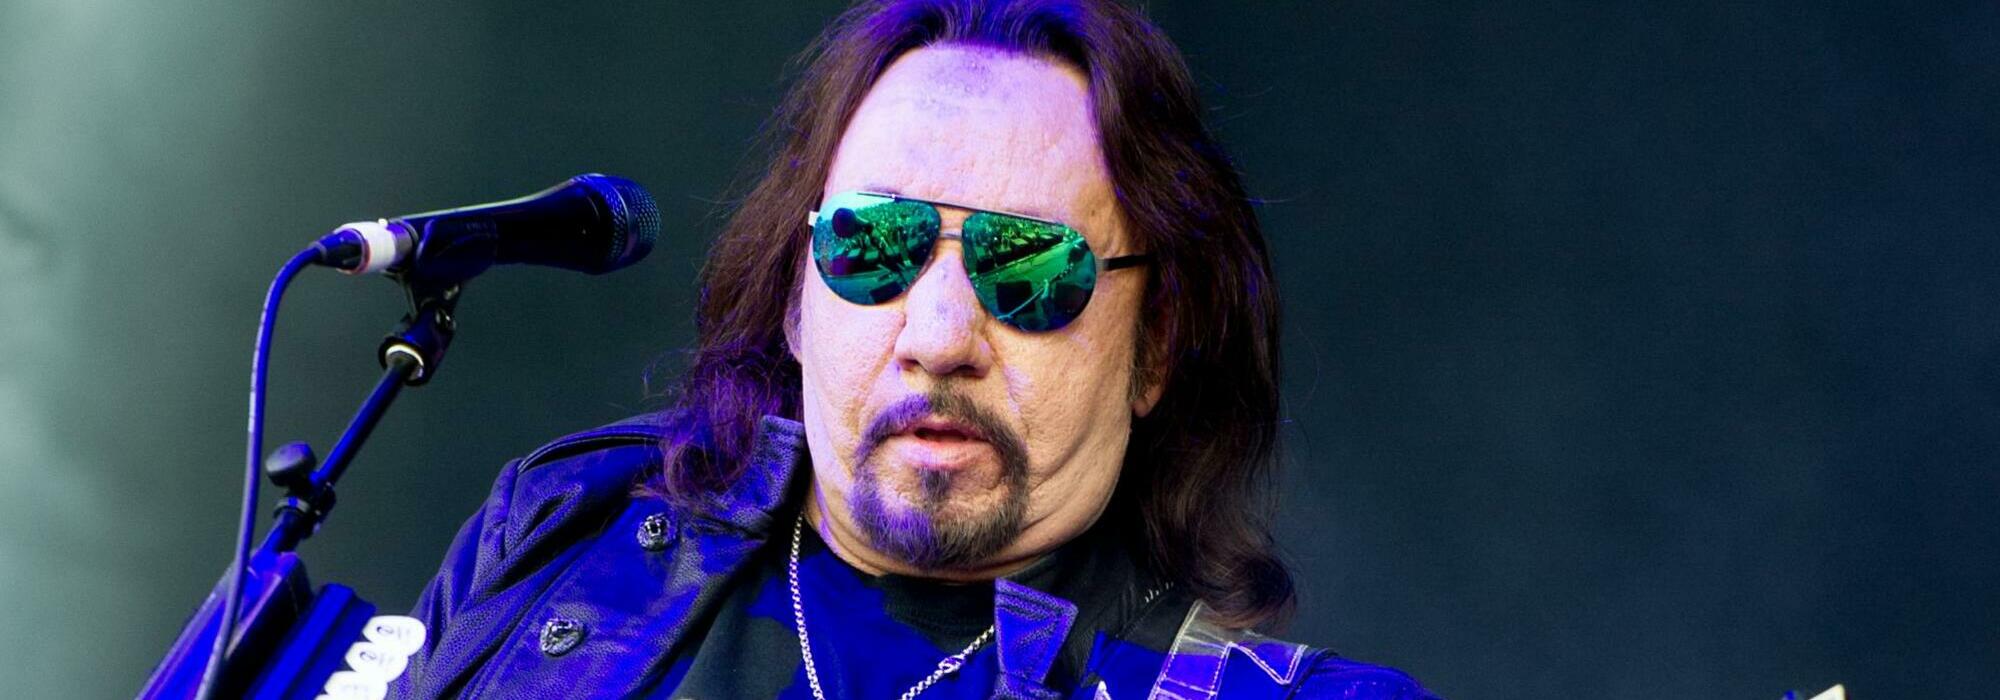 A Ace Frehley live event